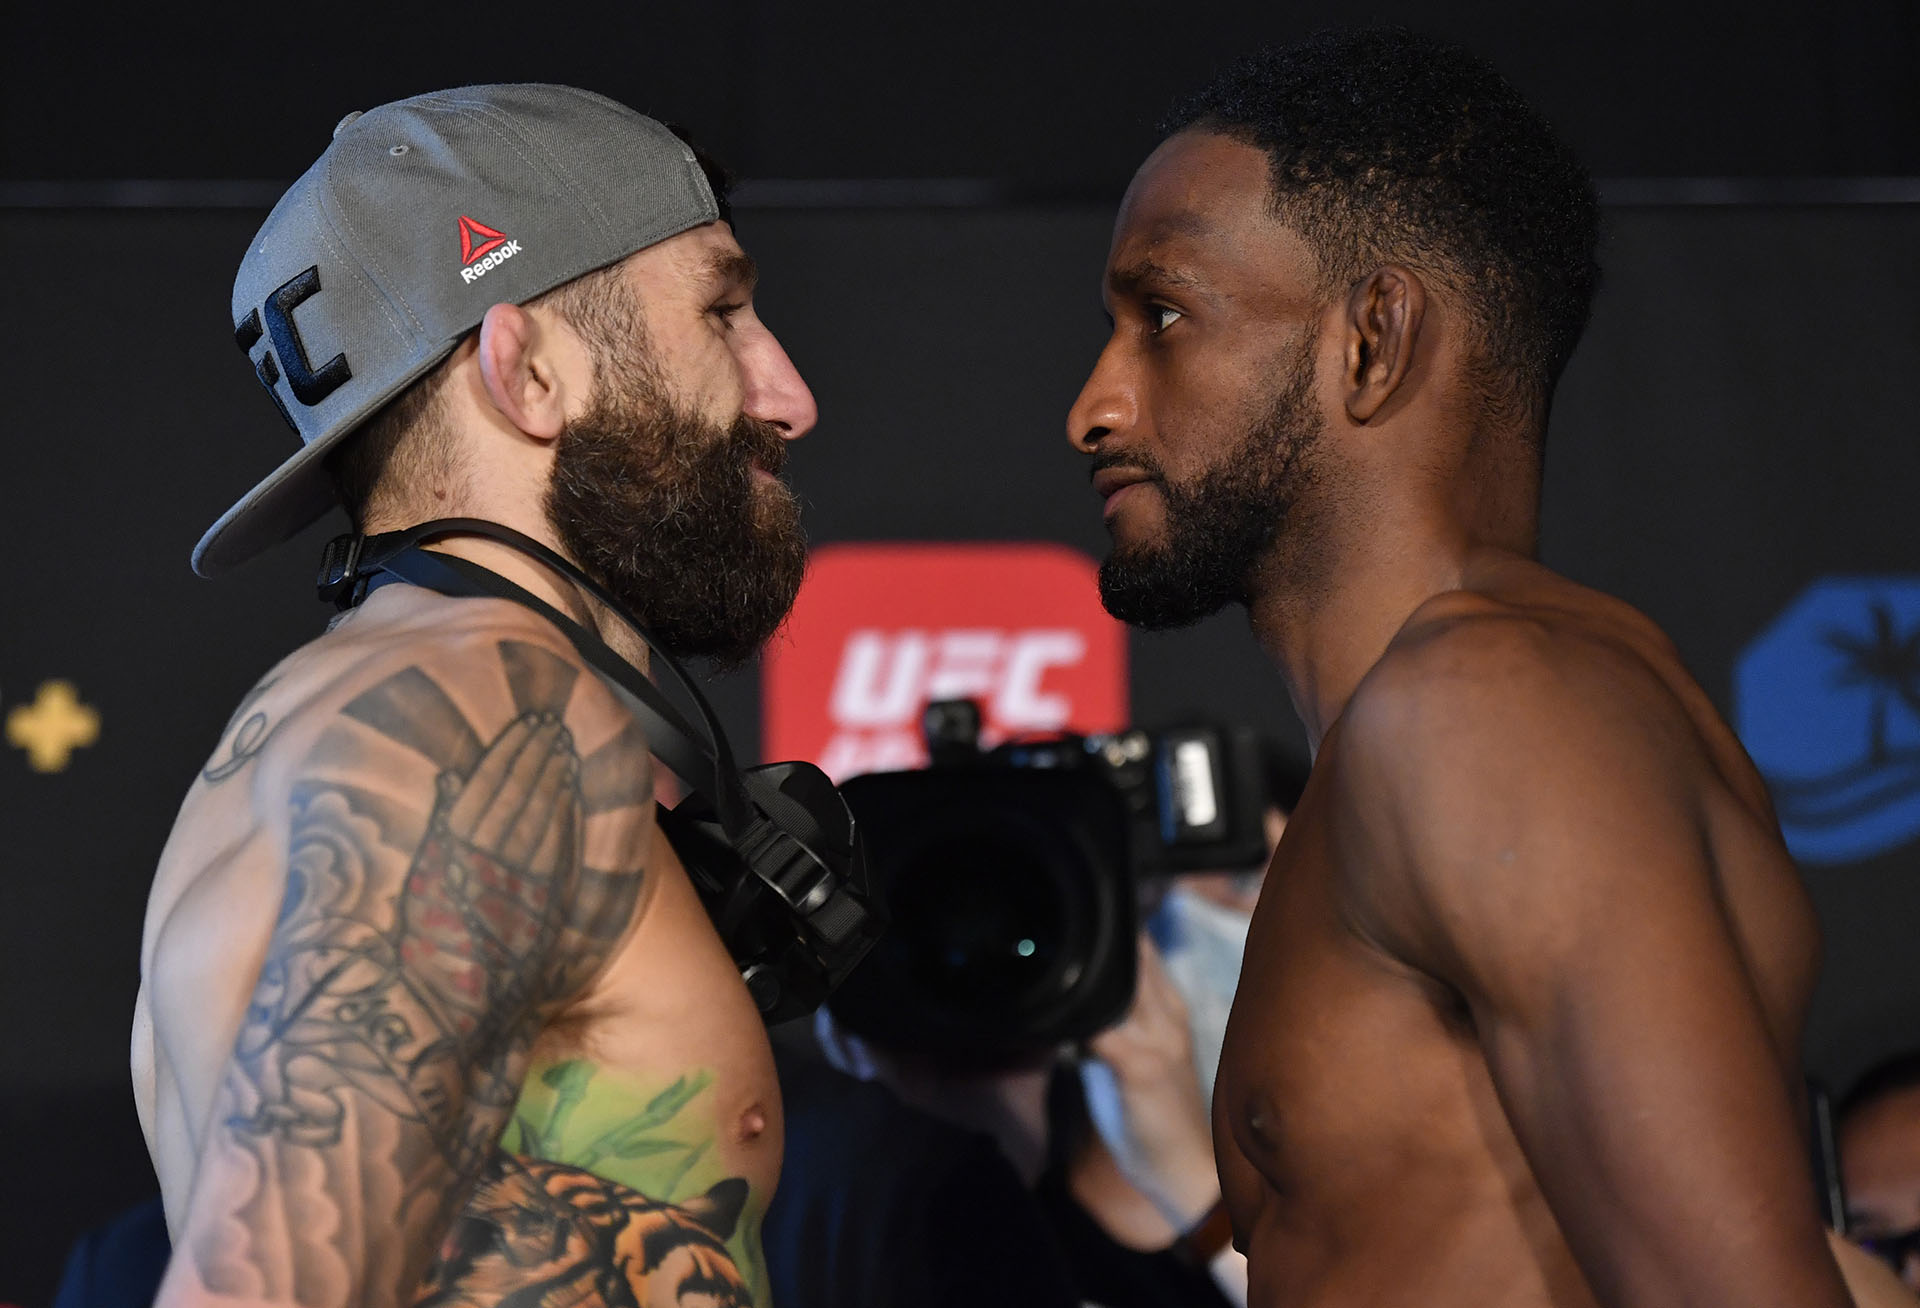 Opponents Michael Chiesa and Neil Magny face off during the UFC weigh-in at Etihad Arena on UFC Fight Island on January 19, 2021 in Abu Dhabi, United Arab Emirates